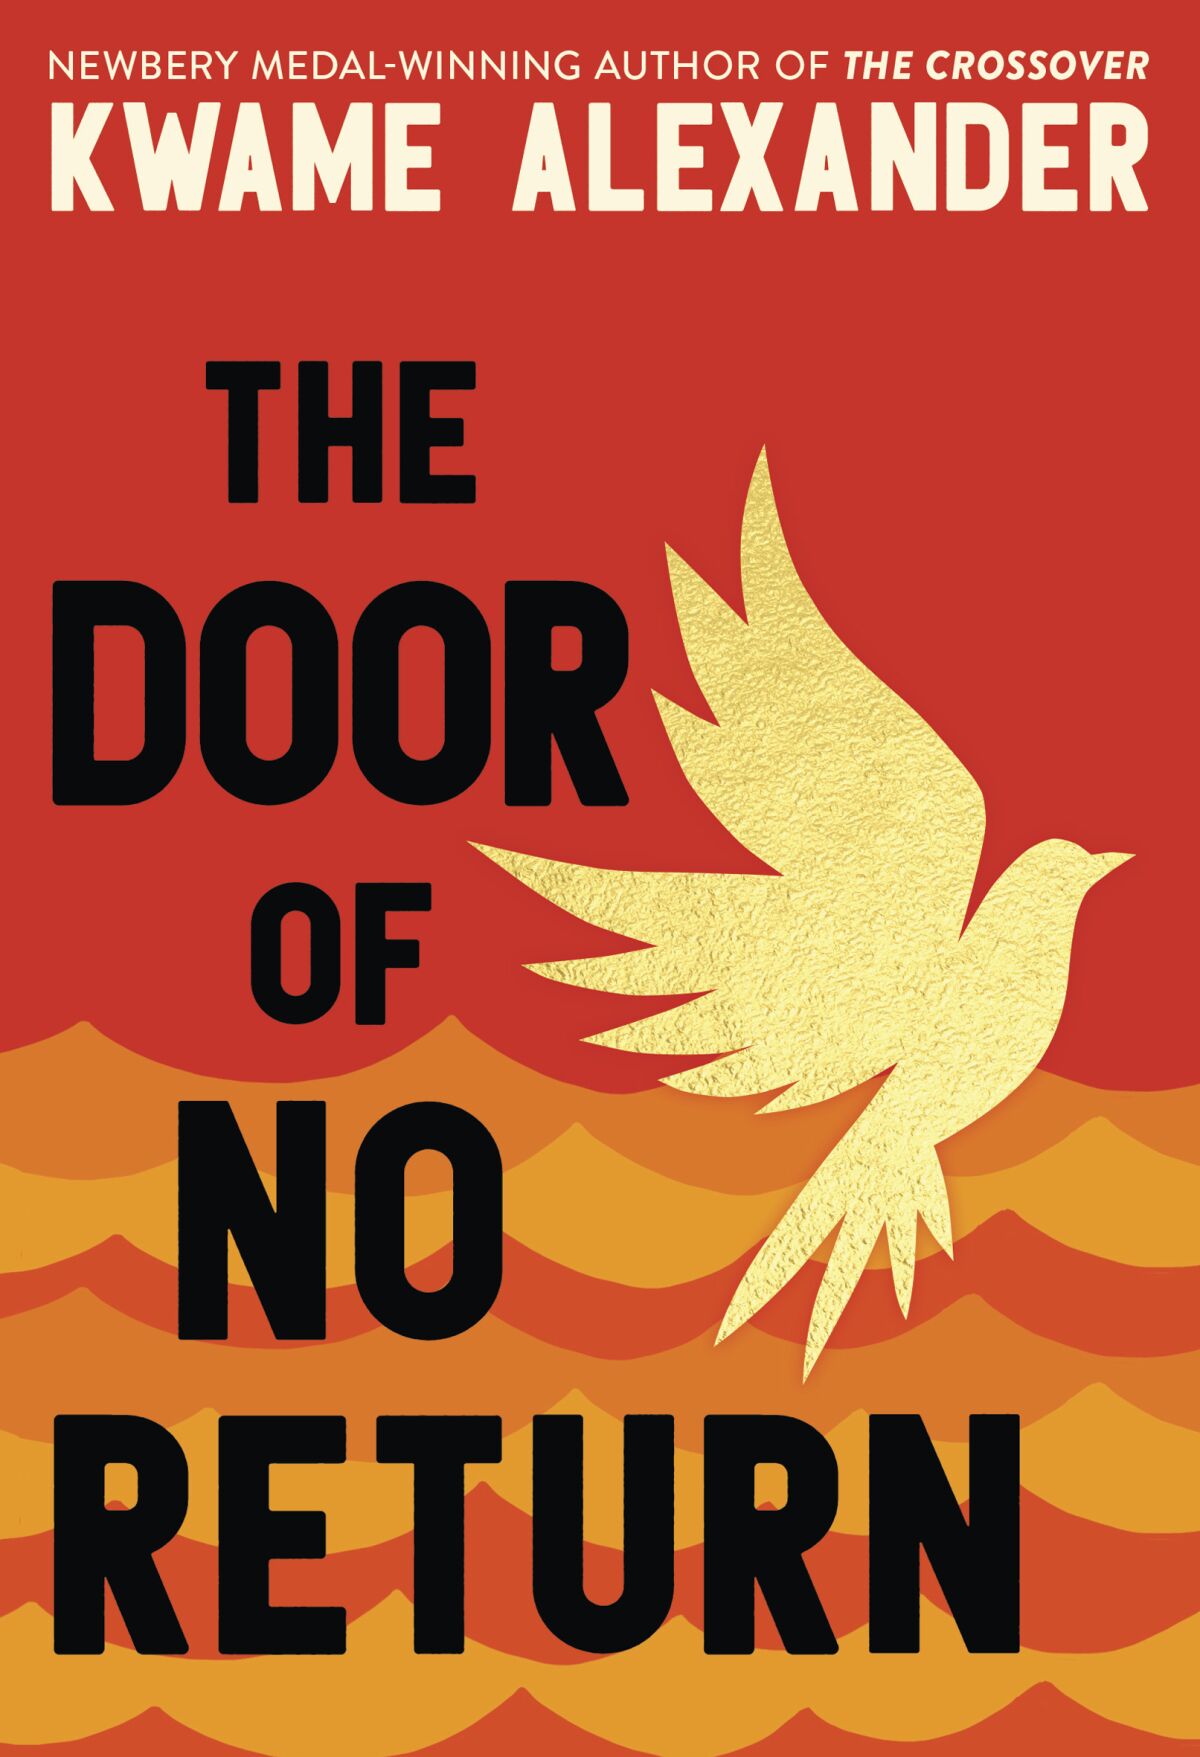 This cover image released by Little, Brown Books for Young Readers shows "The Door of No Return" by Kwame Alexander, jacket art © 2022 by Sindiso Nyoni. (Little, Brown Books for Young Readers via AP)